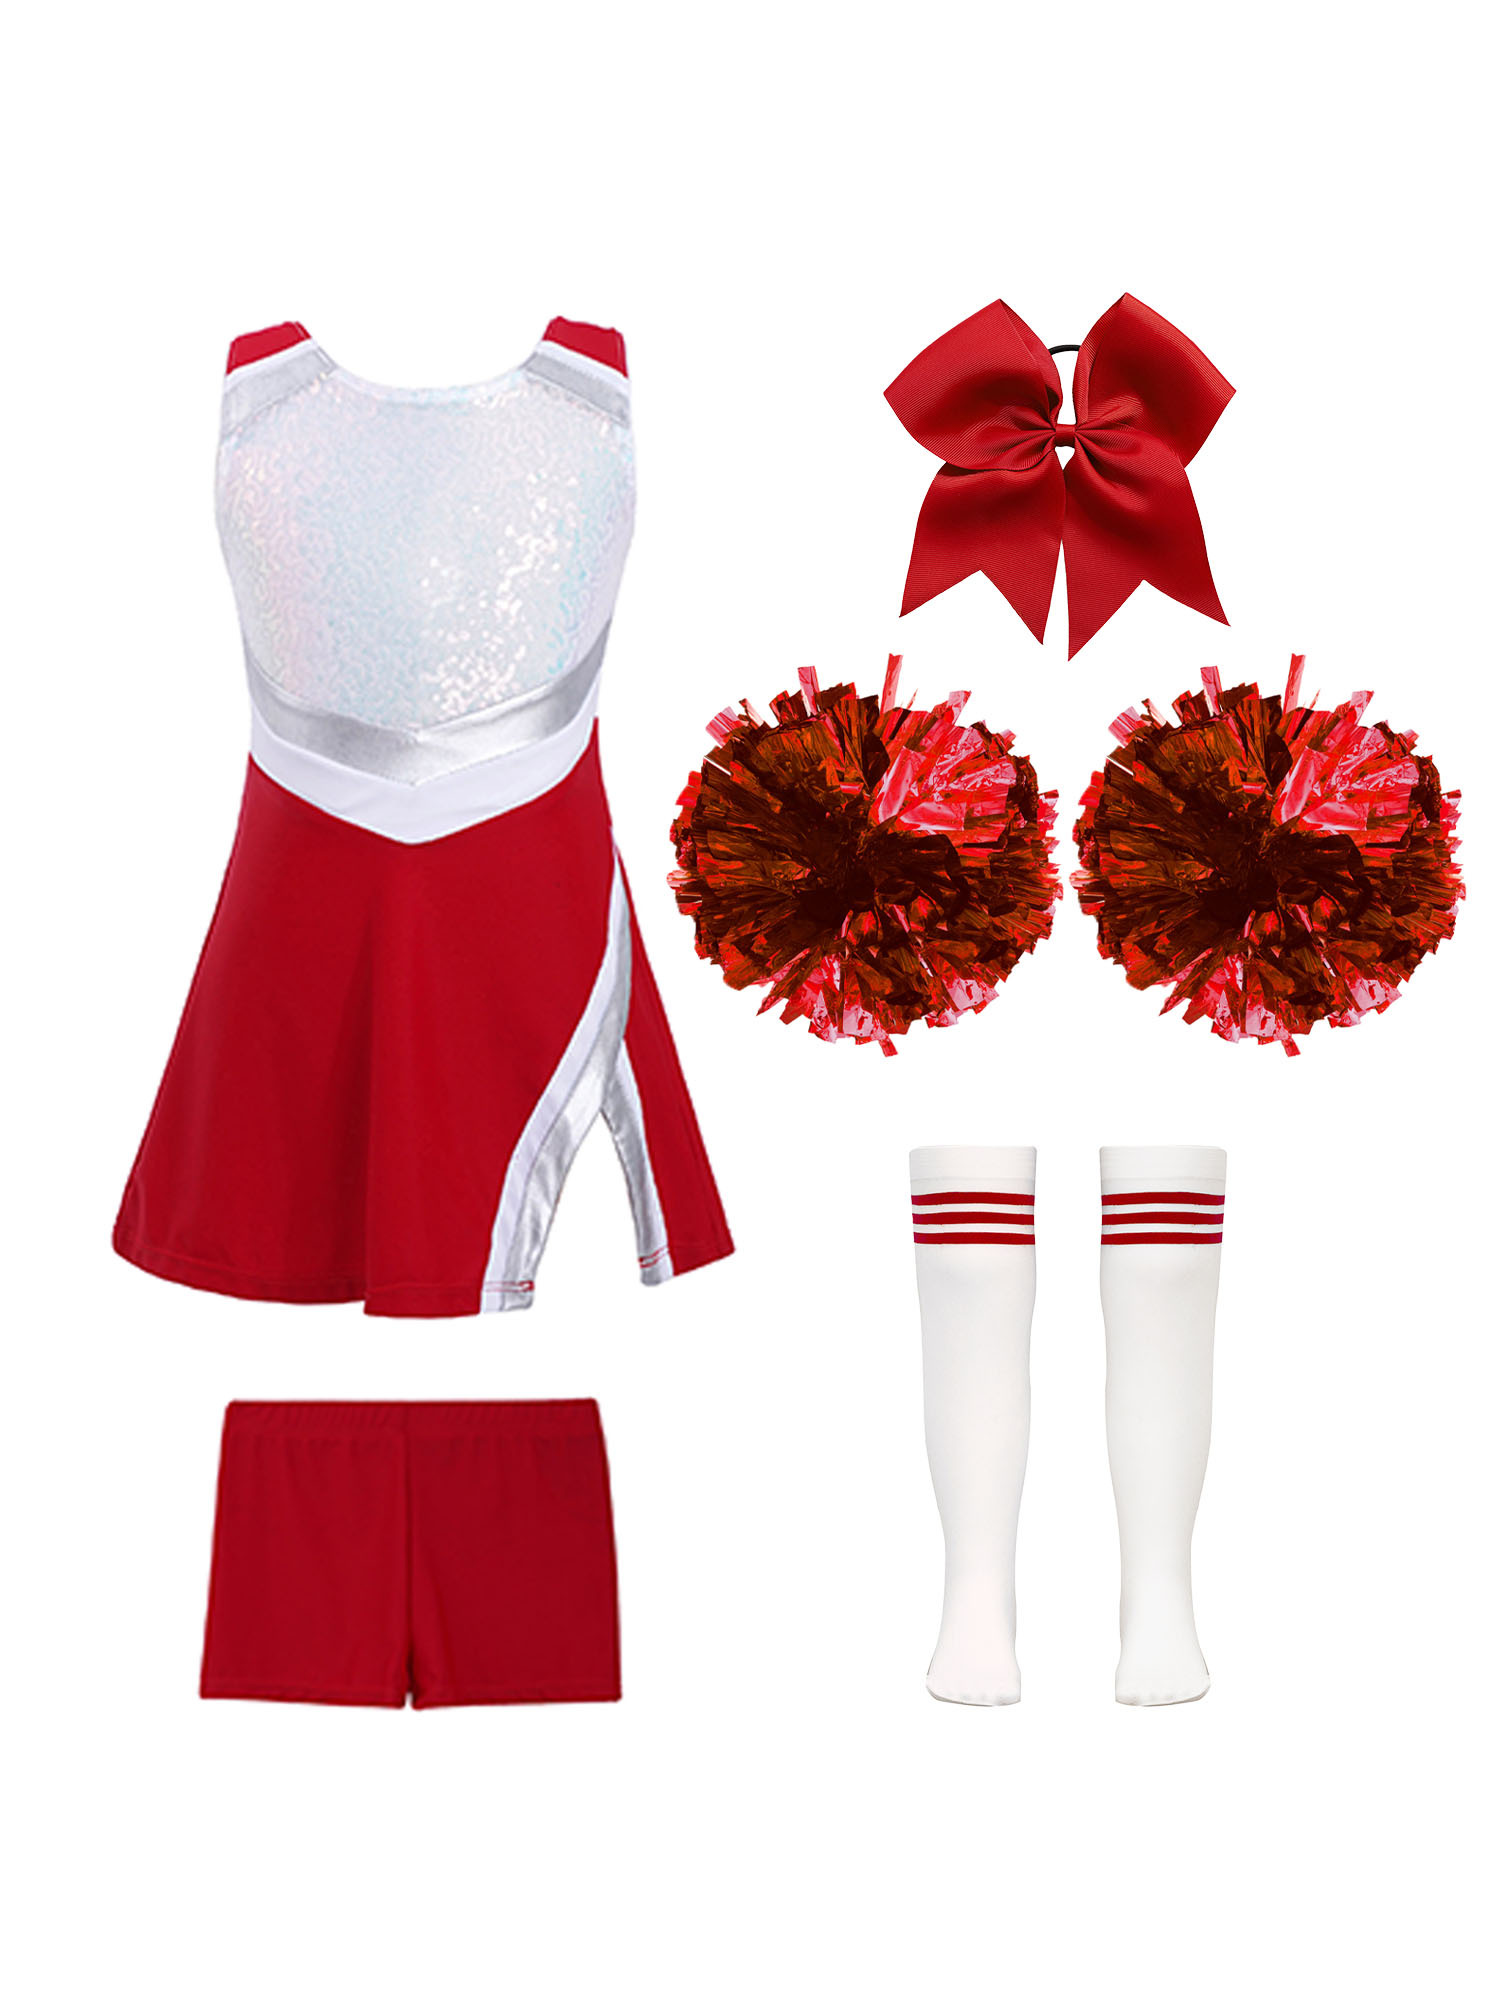 TiaoBug Kids Girls Cheer Leader Uniform Sports Games Cheerleading Dance Outfits Halloween Carnival Fancy Dress Up A Red 12 - image 1 of 5